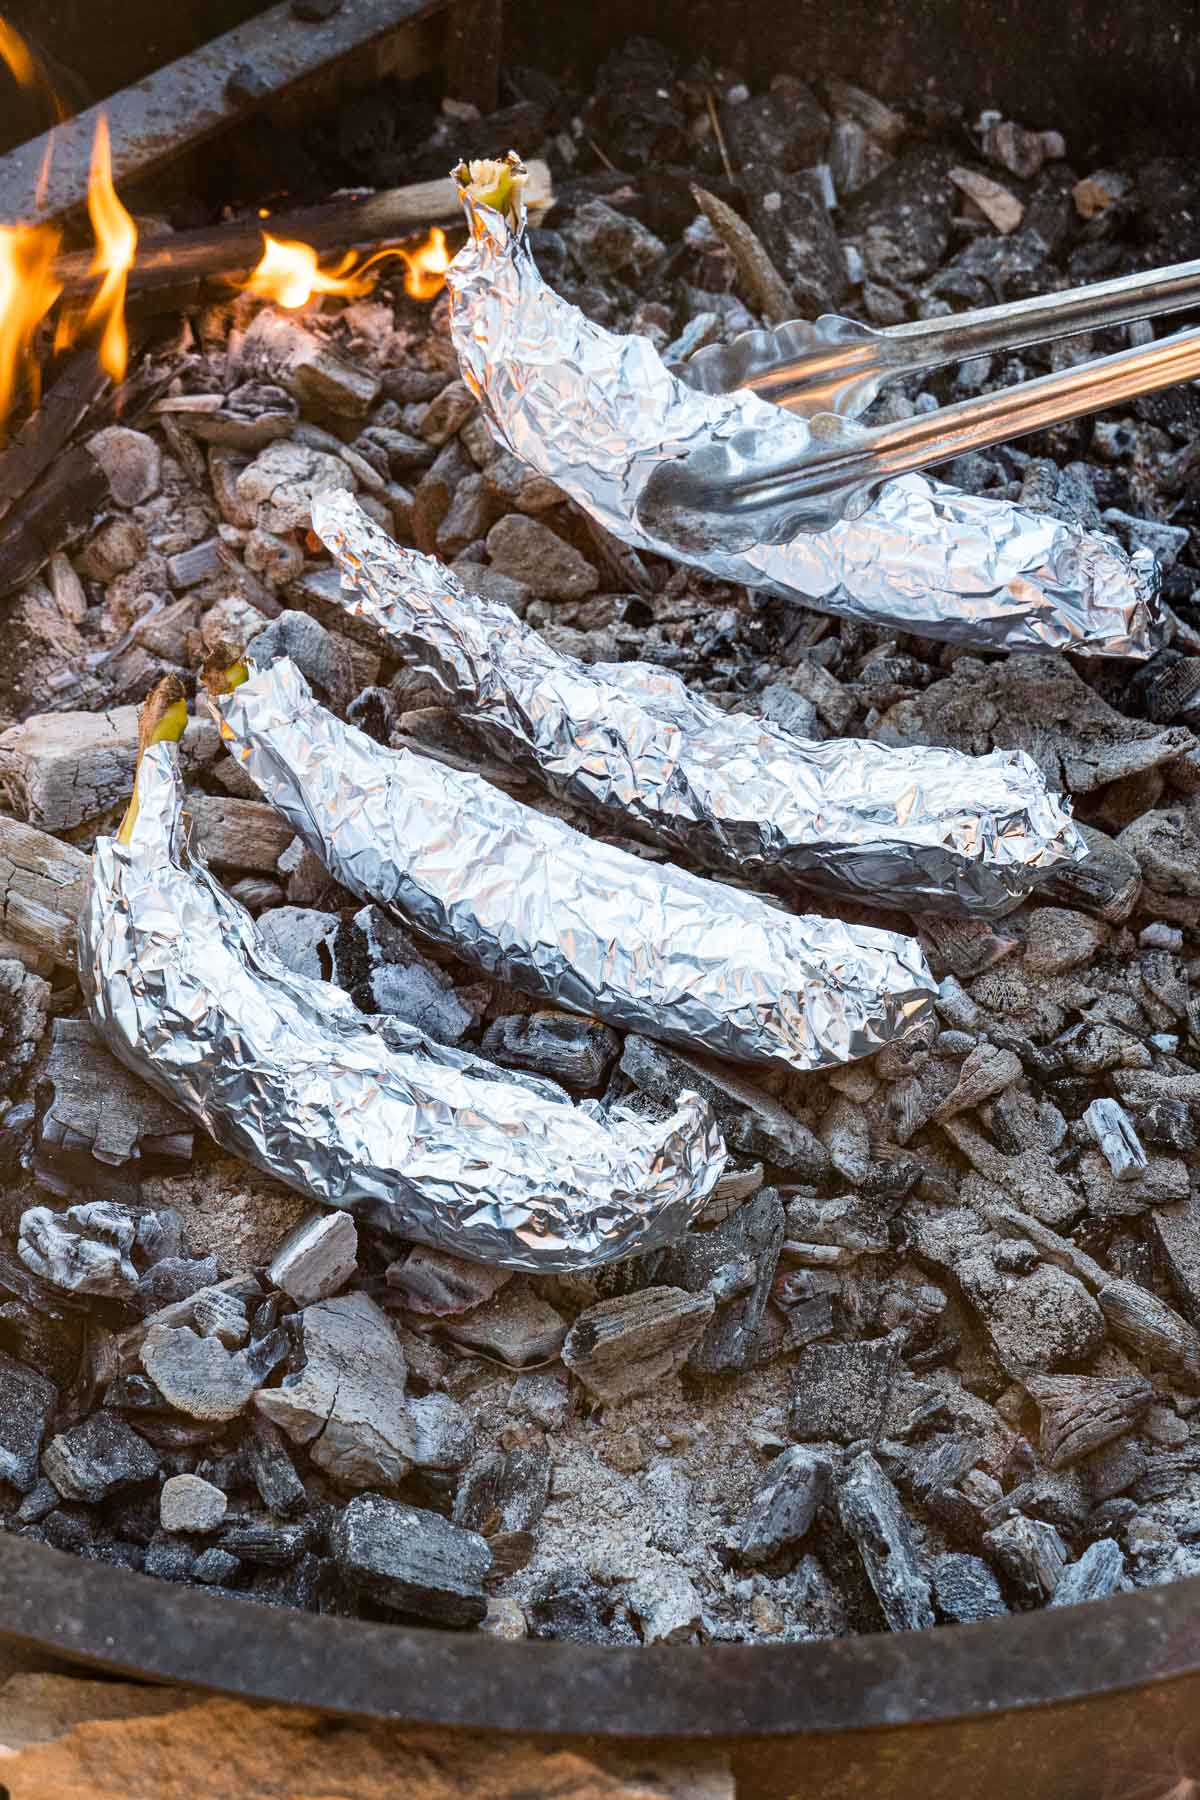 Four bananas wrapped in foil in the embers of a campfire